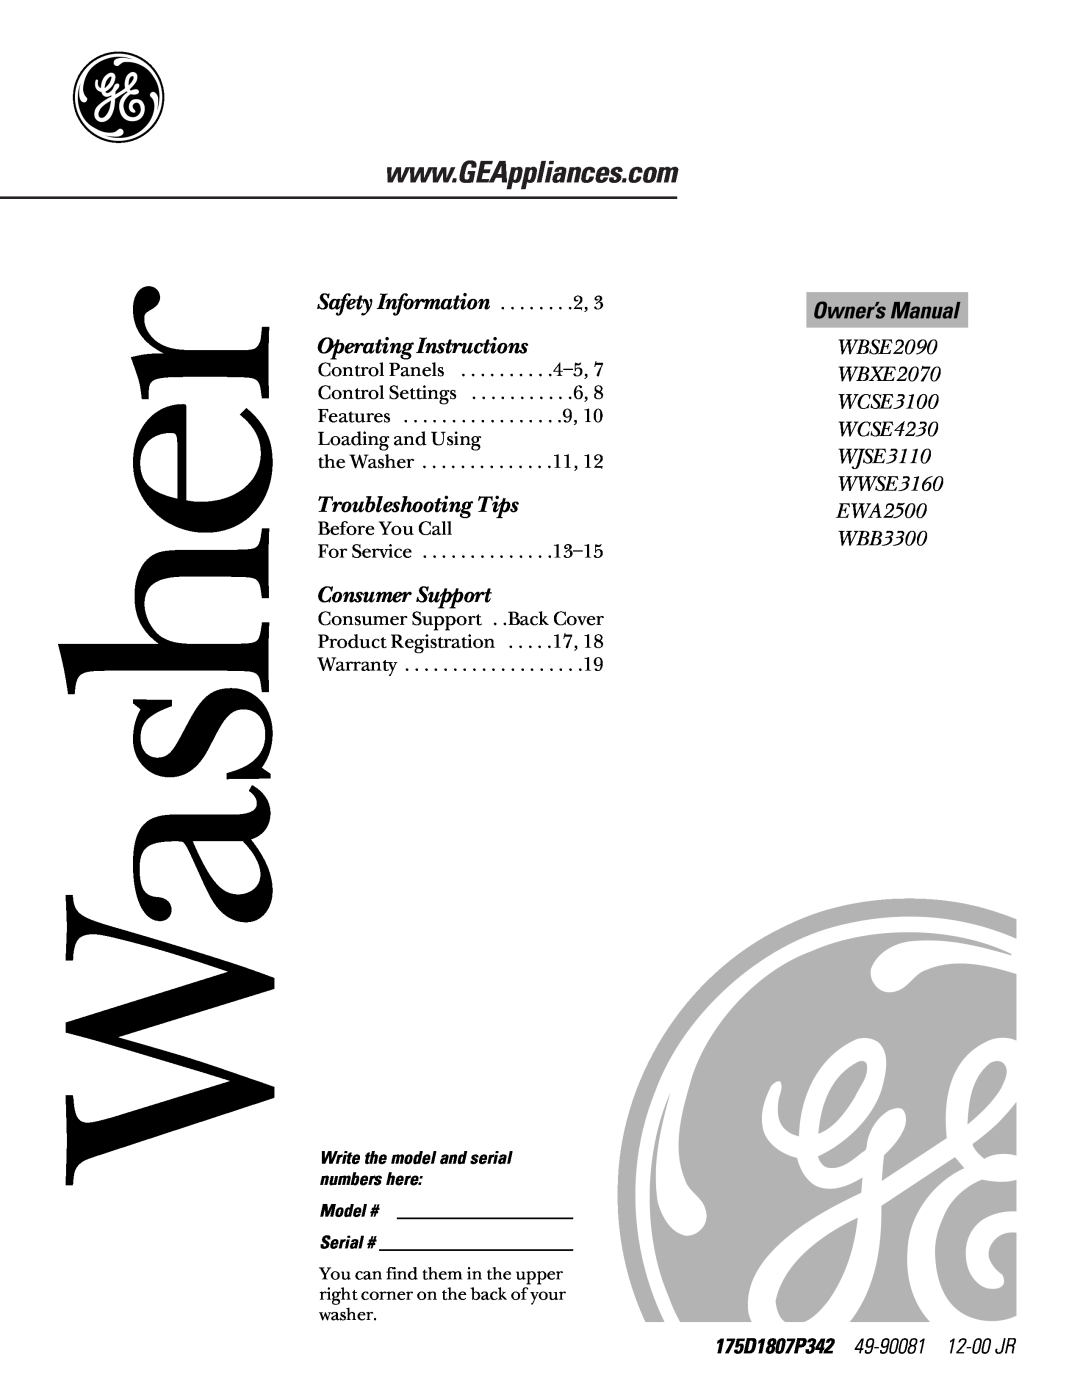 GE EWA2500 owner manual Owner’s Manual, 175D1807P342 49-90081 12-00 JR, Washer, Safety Information, Operating Instructions 